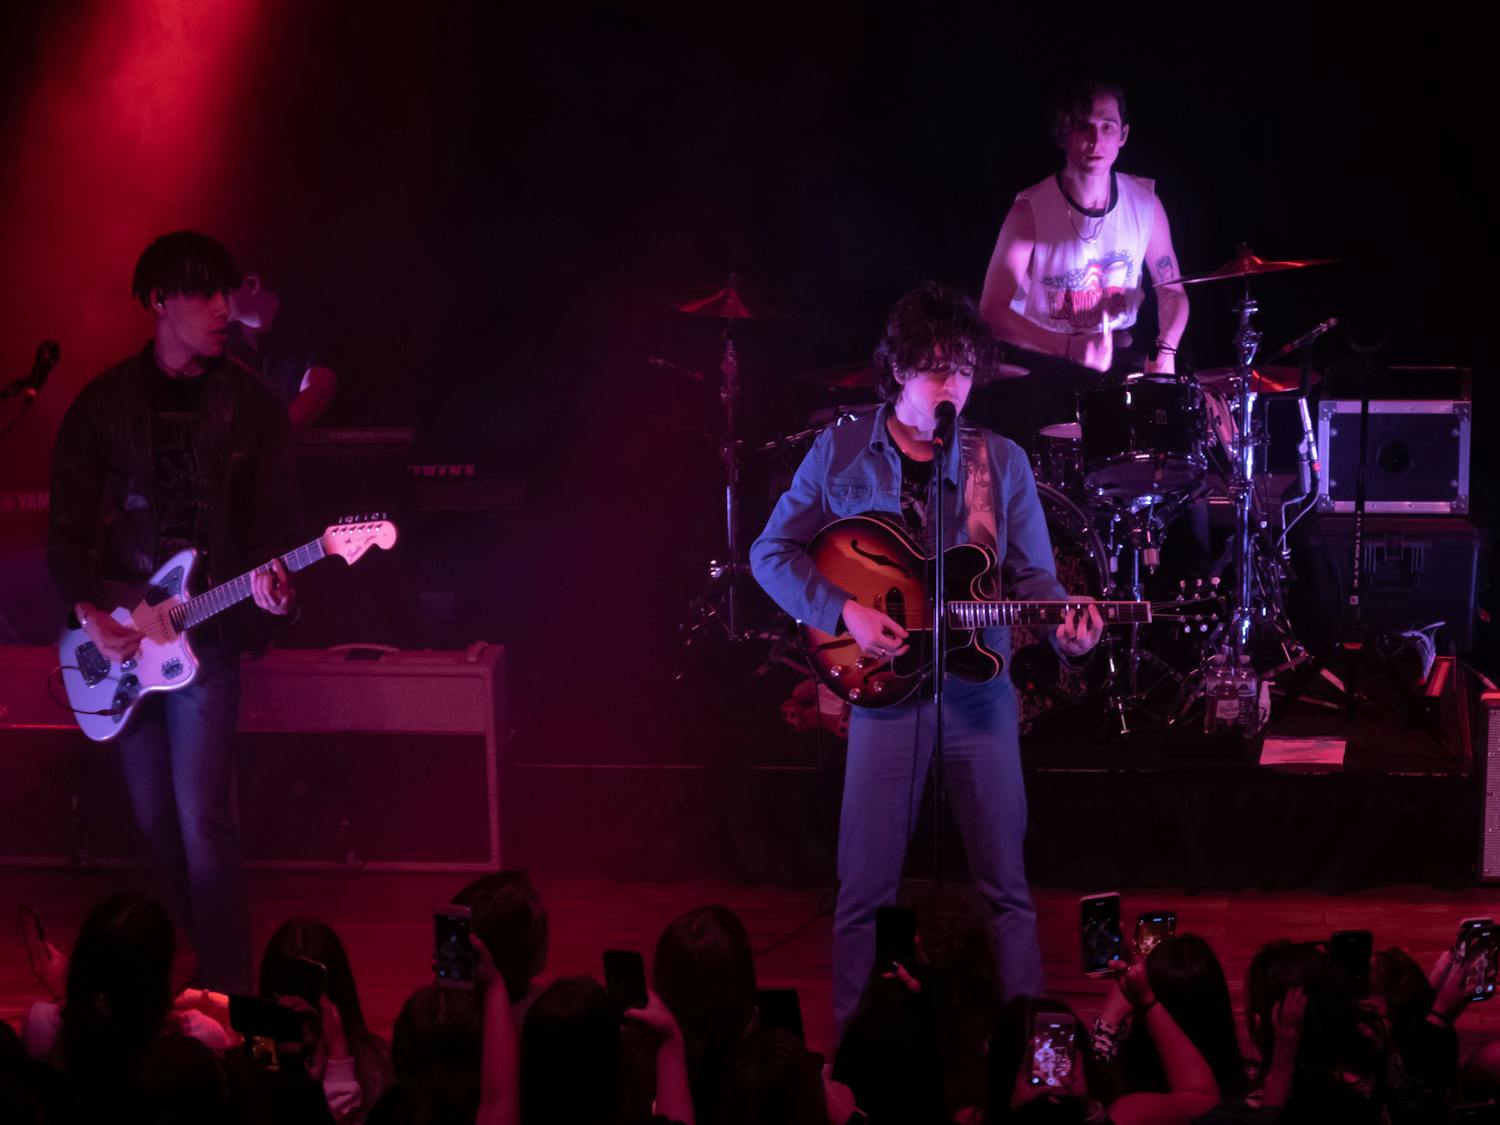 Inhaler, an Irish rock band from Dublin, performs a concert at Terminal West in Atlanta, Georgia, on March 4, 2022. The group played its first album, "It Won't Always Be Like This," which helped it define its distinct and recognizable sound.